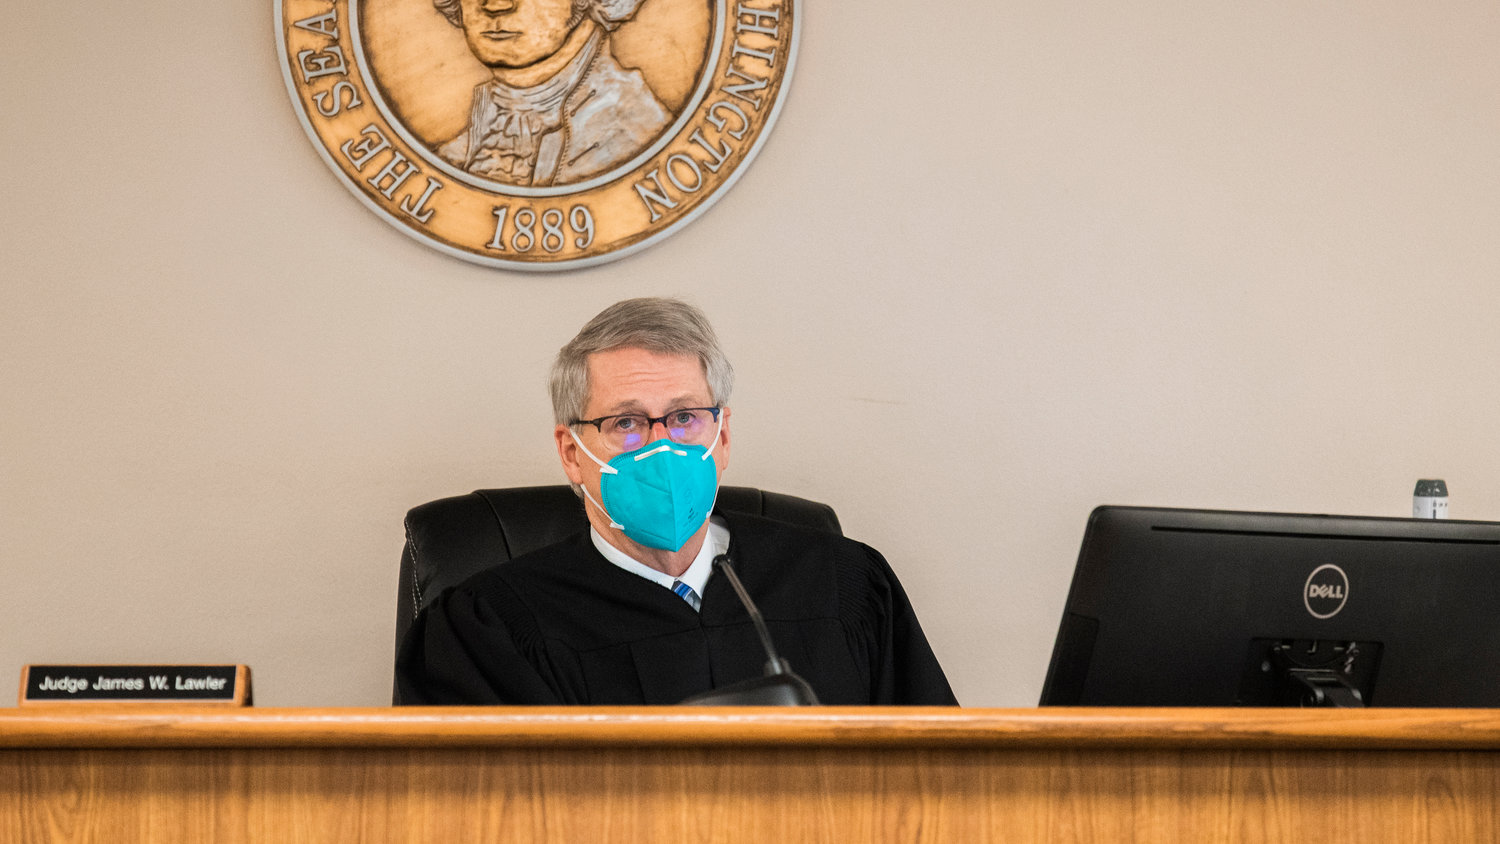 Judge James W. Lawler sports a mask as he presides over Lewis County Superior Court Thursday in Chehalis